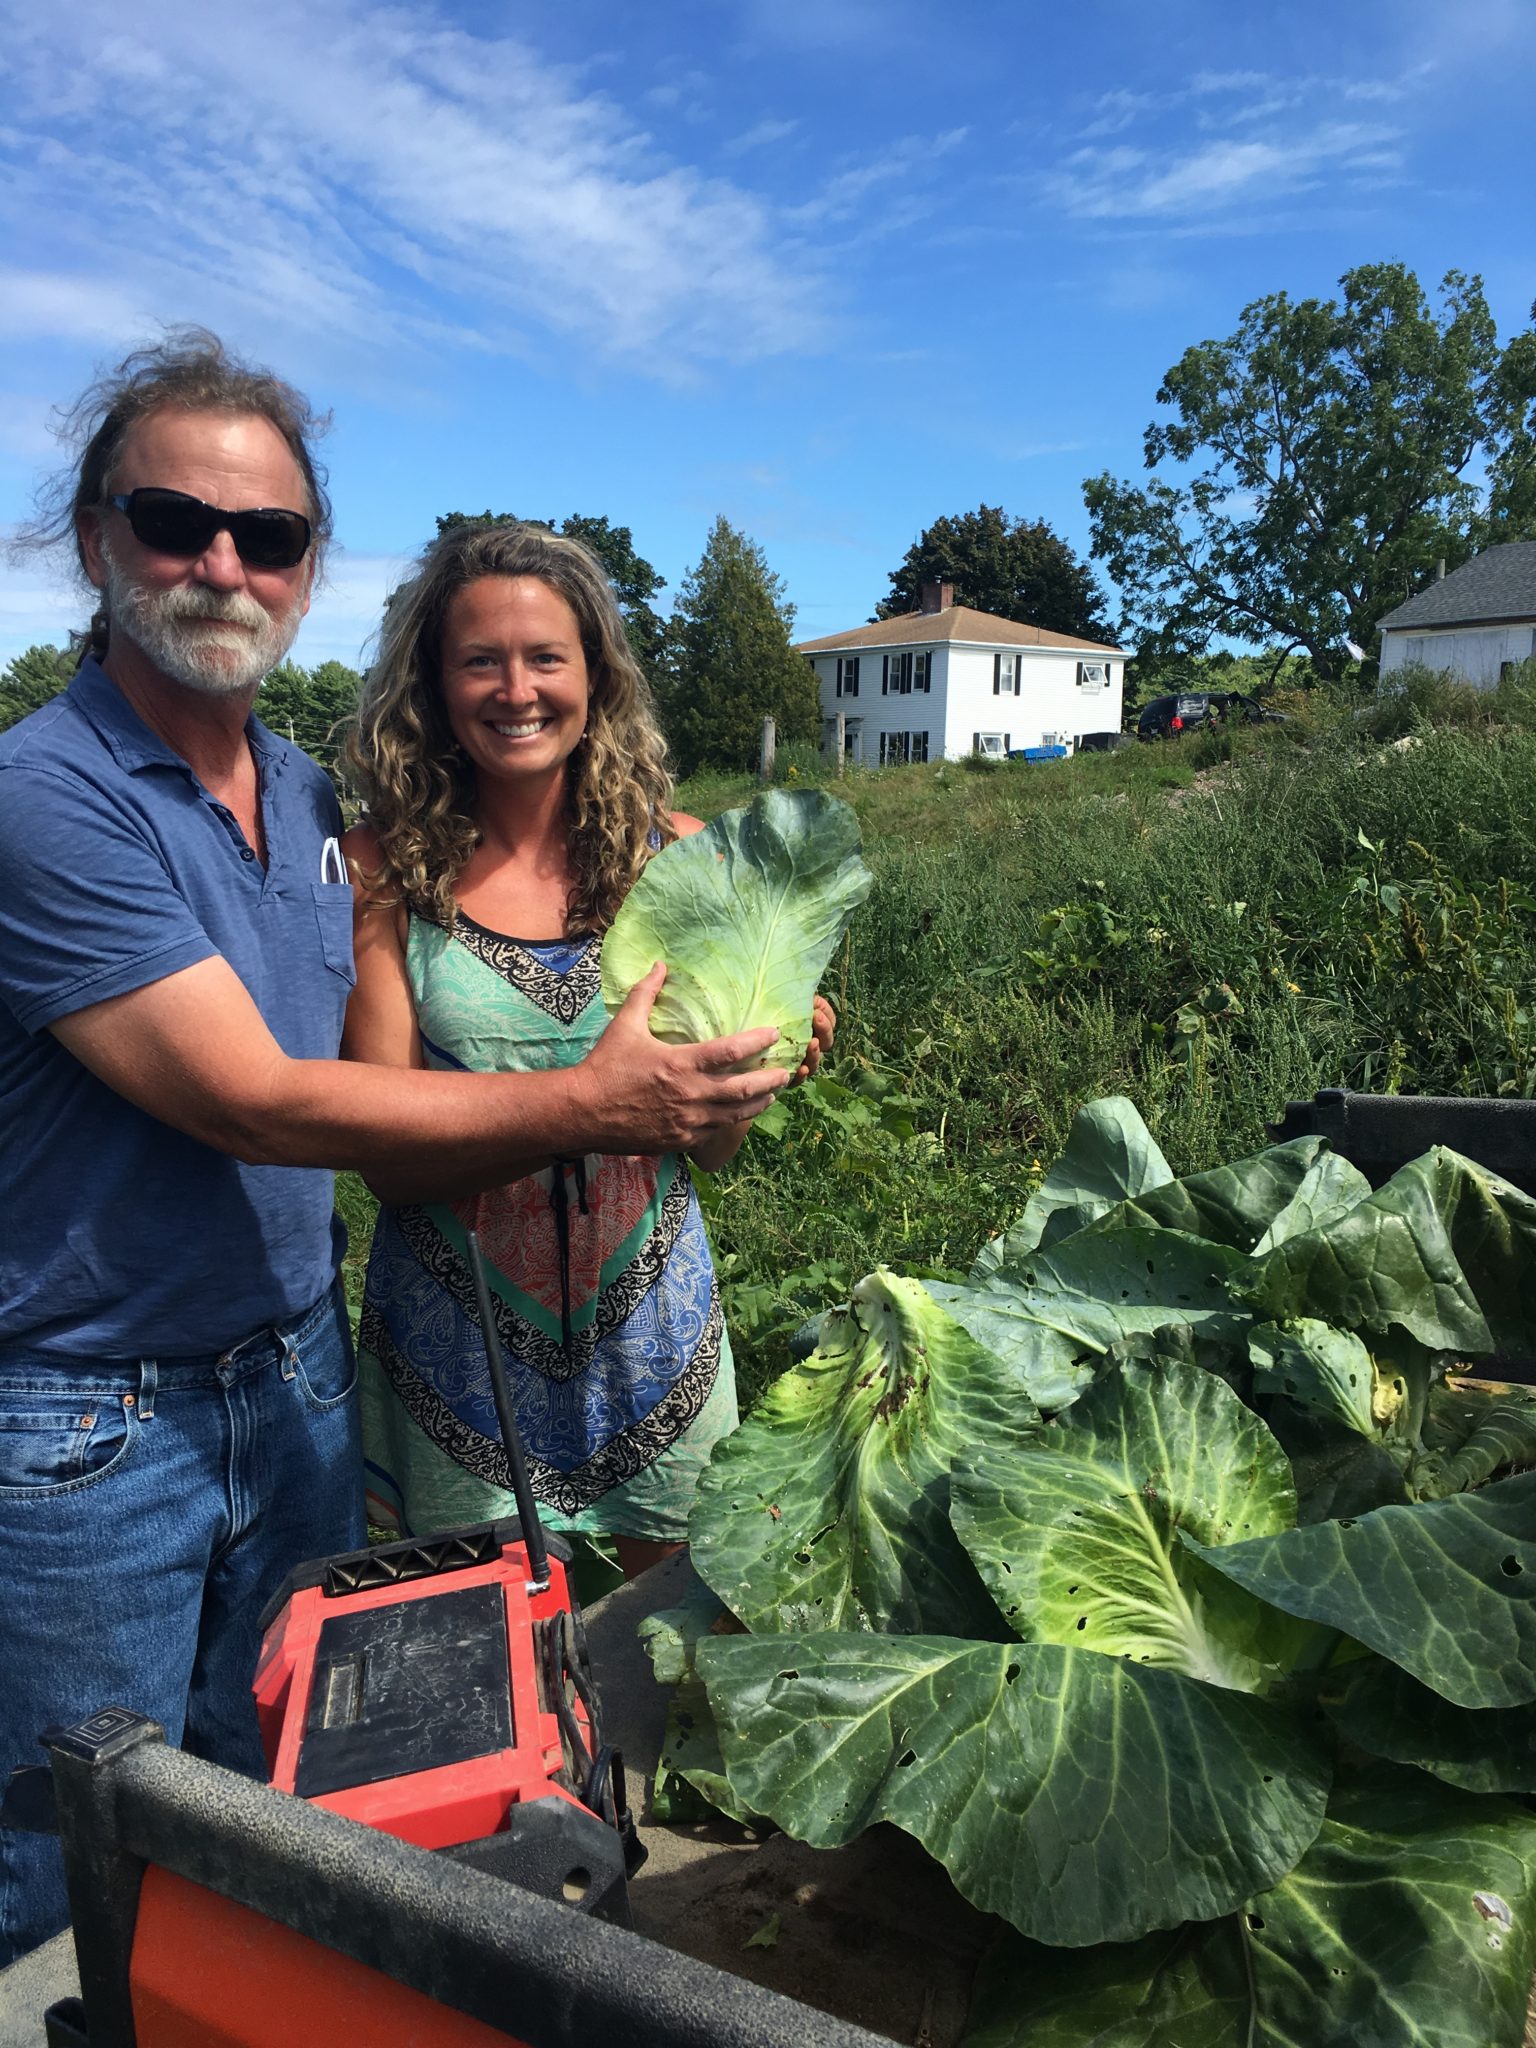 Man and woman at the farm holding a cabbage